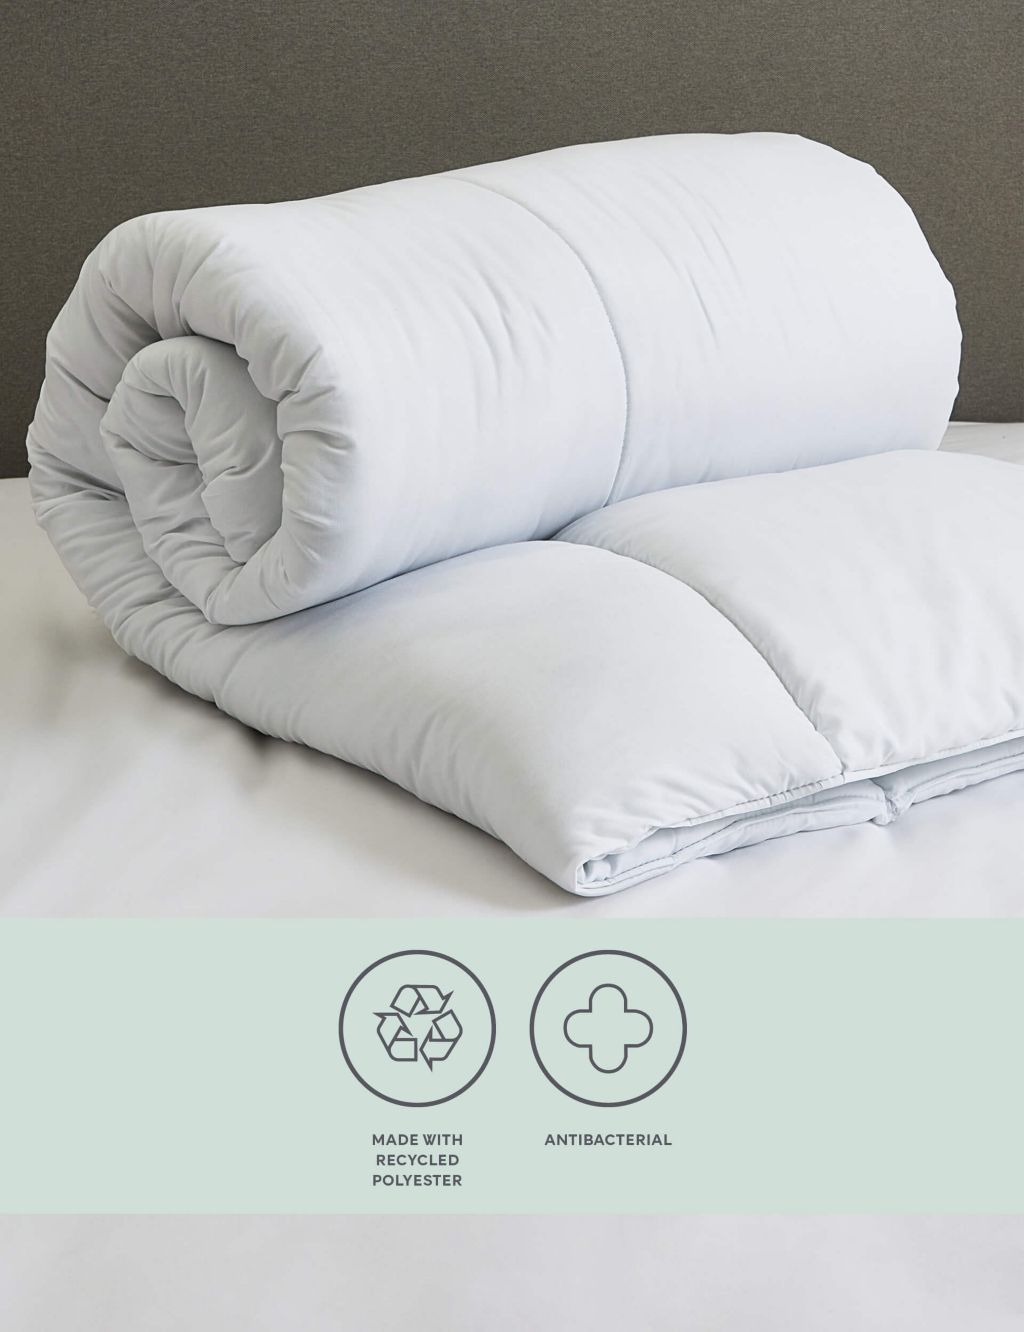 Simply Protect 13.5 Tog Duvet image 1